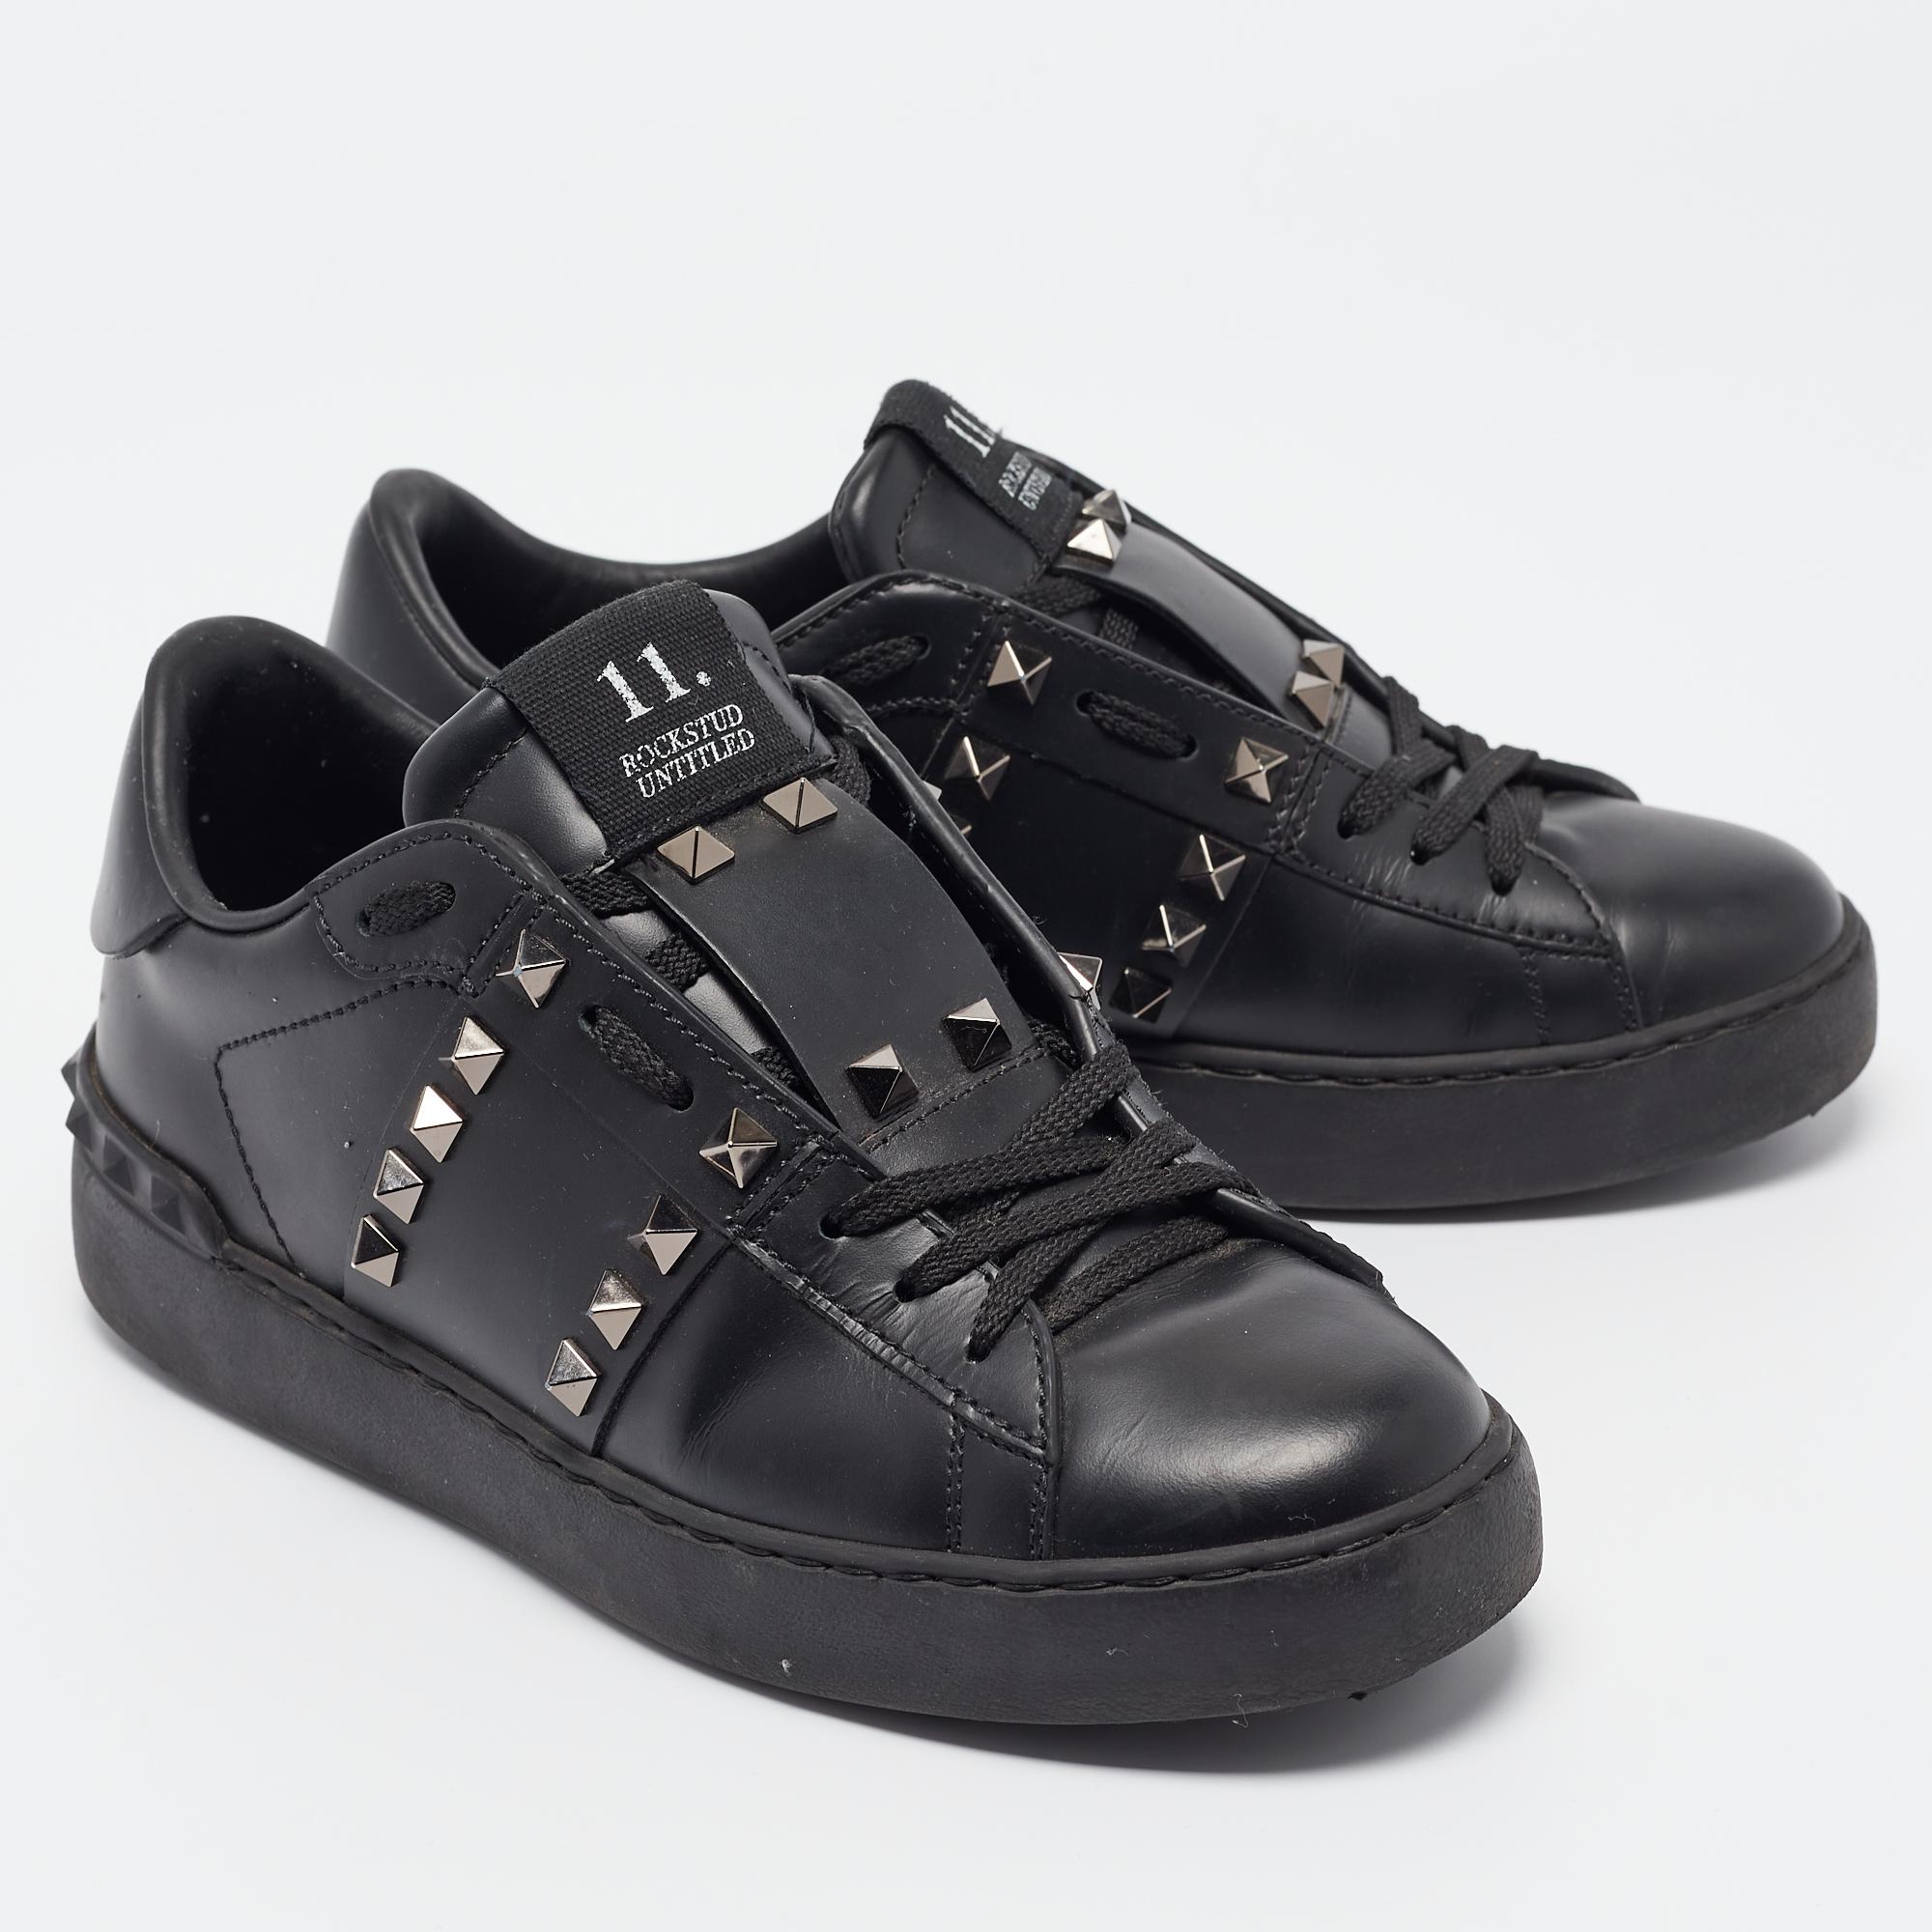 Valentino Black Leather Rockstud Low Top Sneakers Size 36.5 1